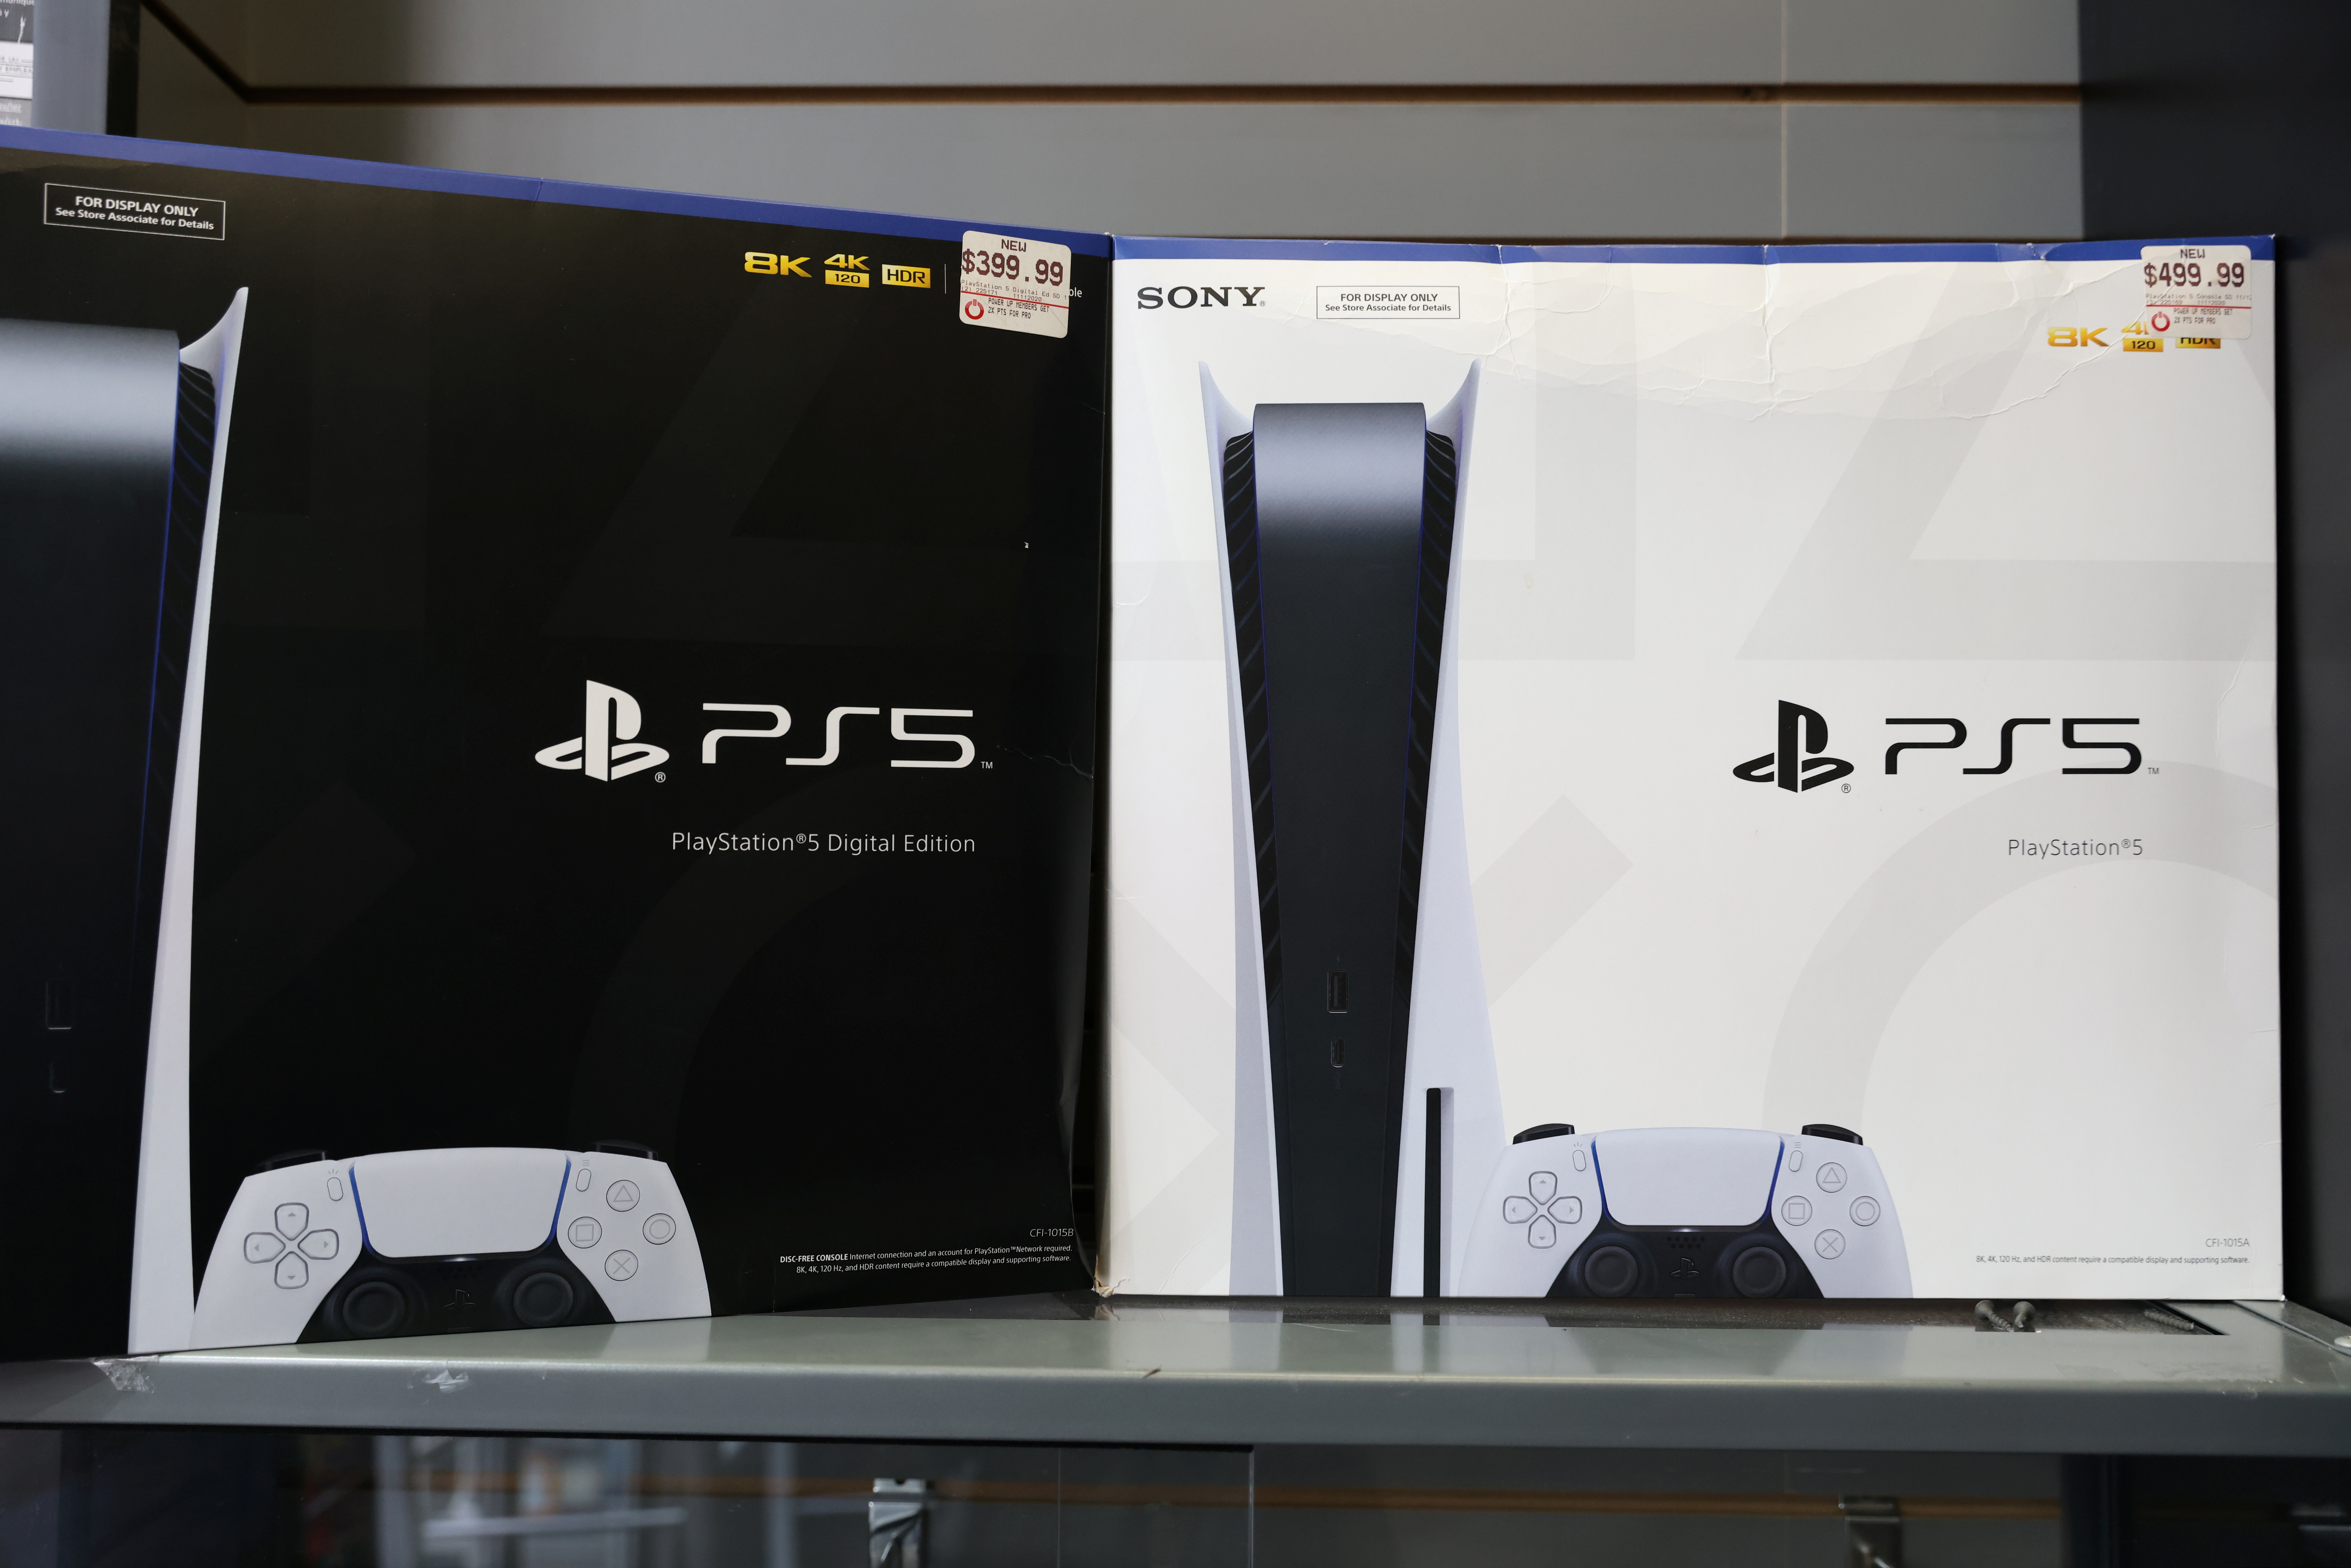 PS5 by PlayStation is displayed in a GameStop in Manhattan, New York